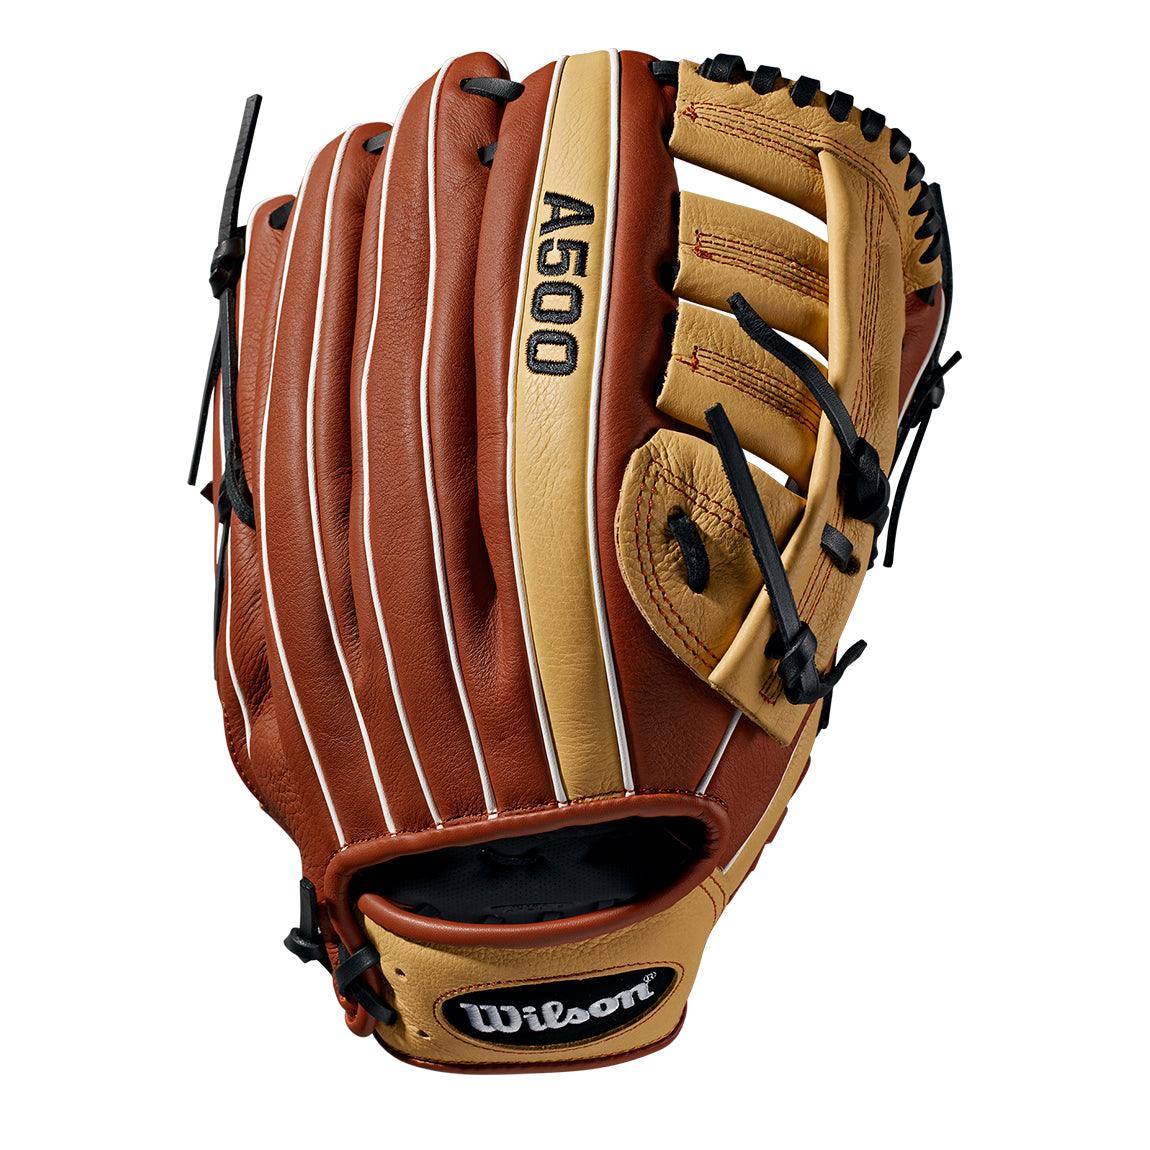 A500 Glove 12.5" - Sports Excellence